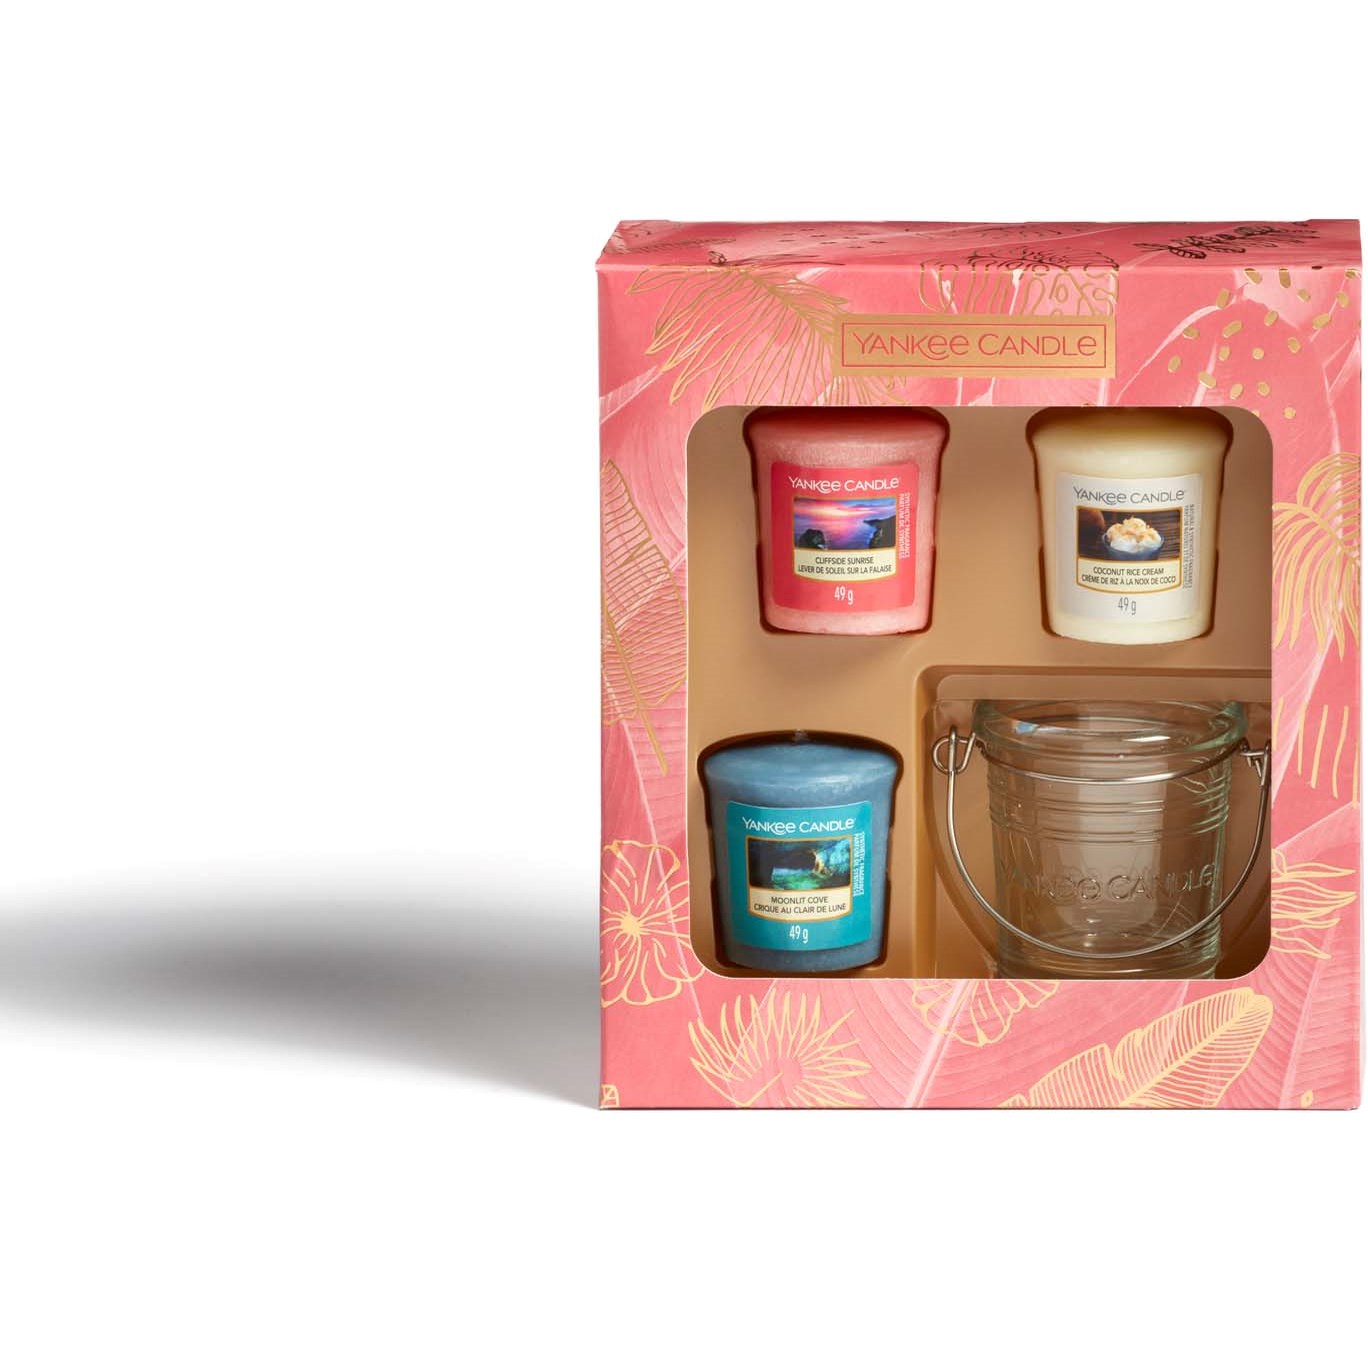 Yankee Candle Gift Set - 3 Votive Candle 1 Holders